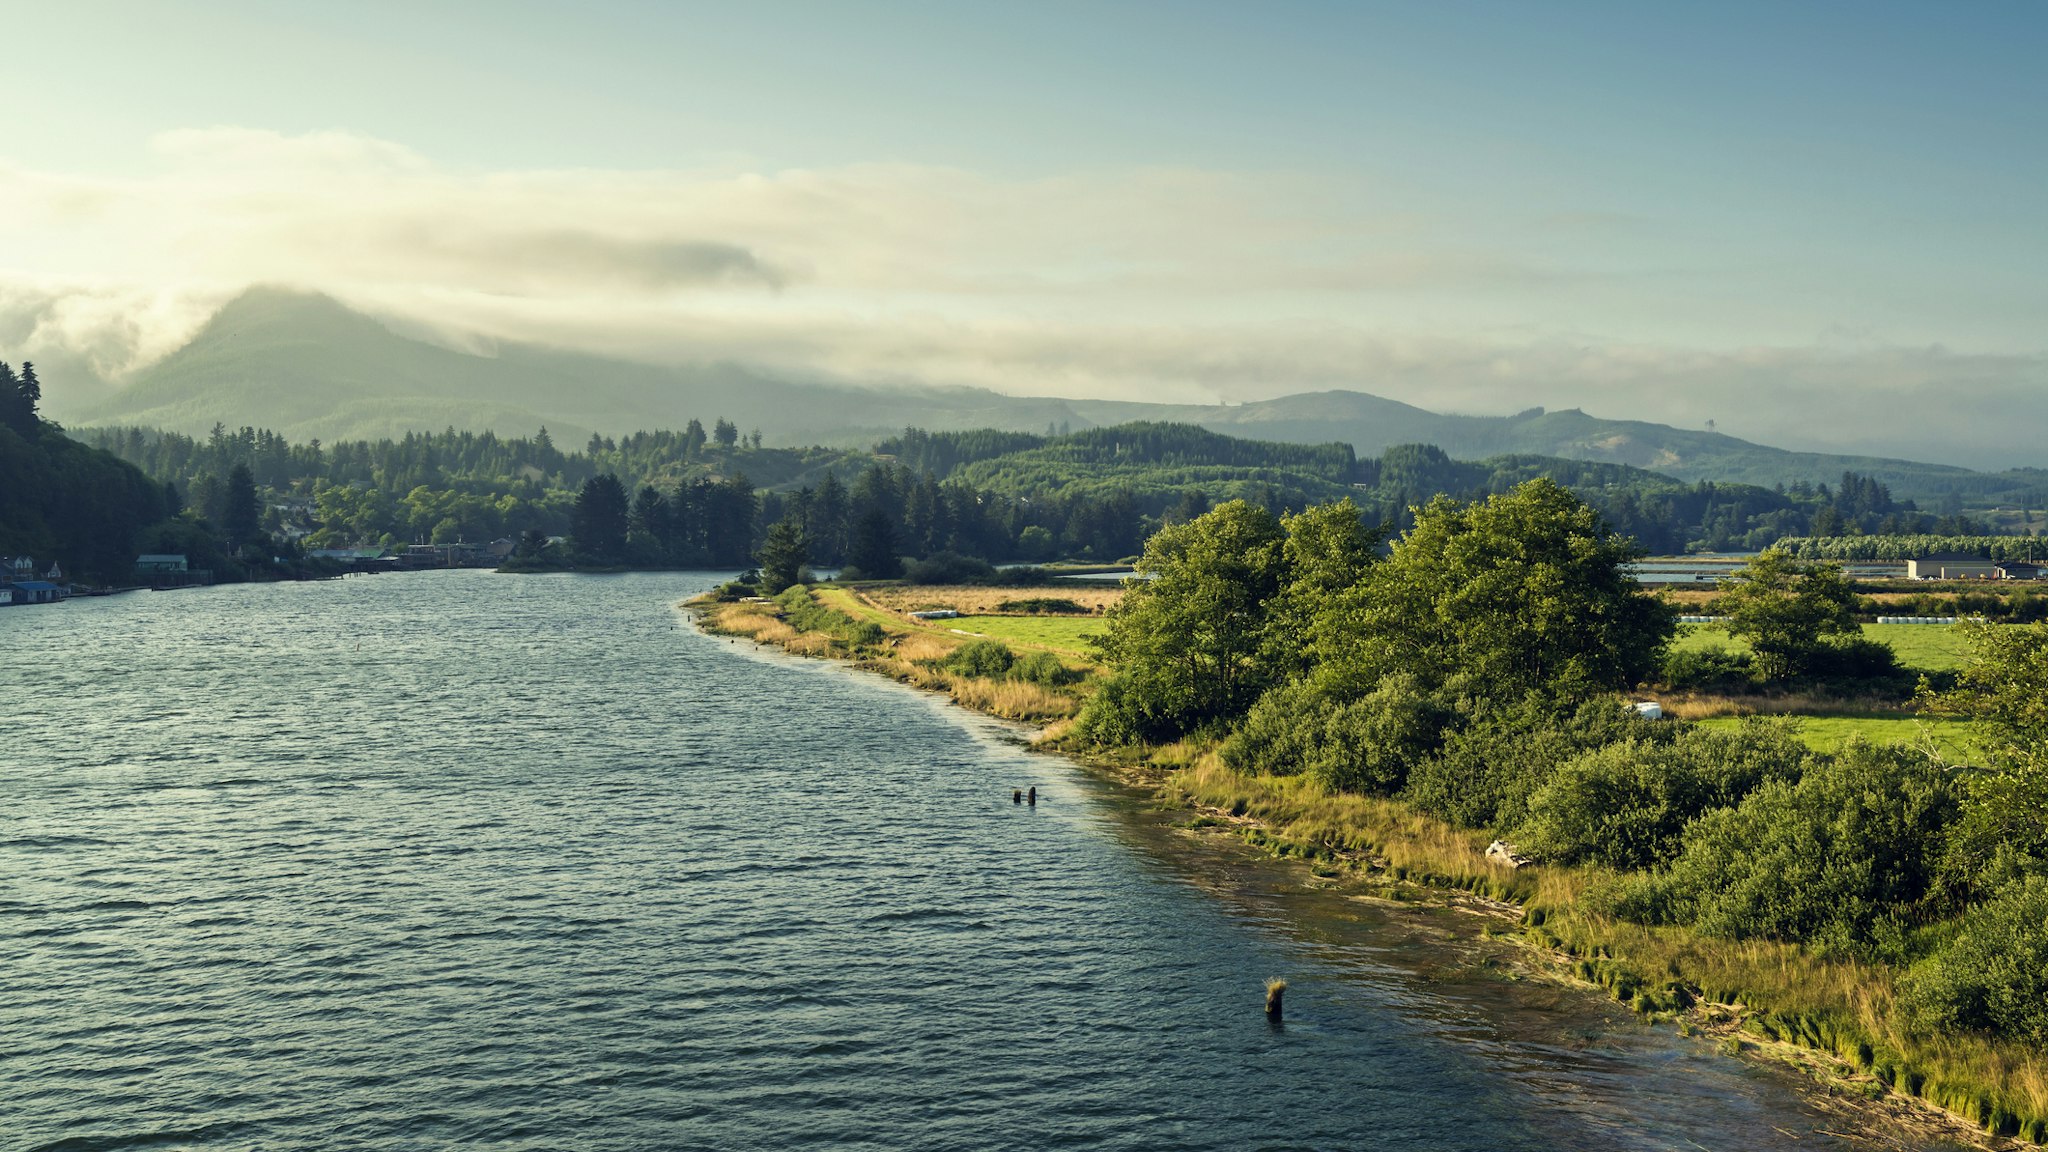 "Small river that runs through Nehalem, Oregon to Pacific Ocean.Shot in the late afternoon from hwy 101."